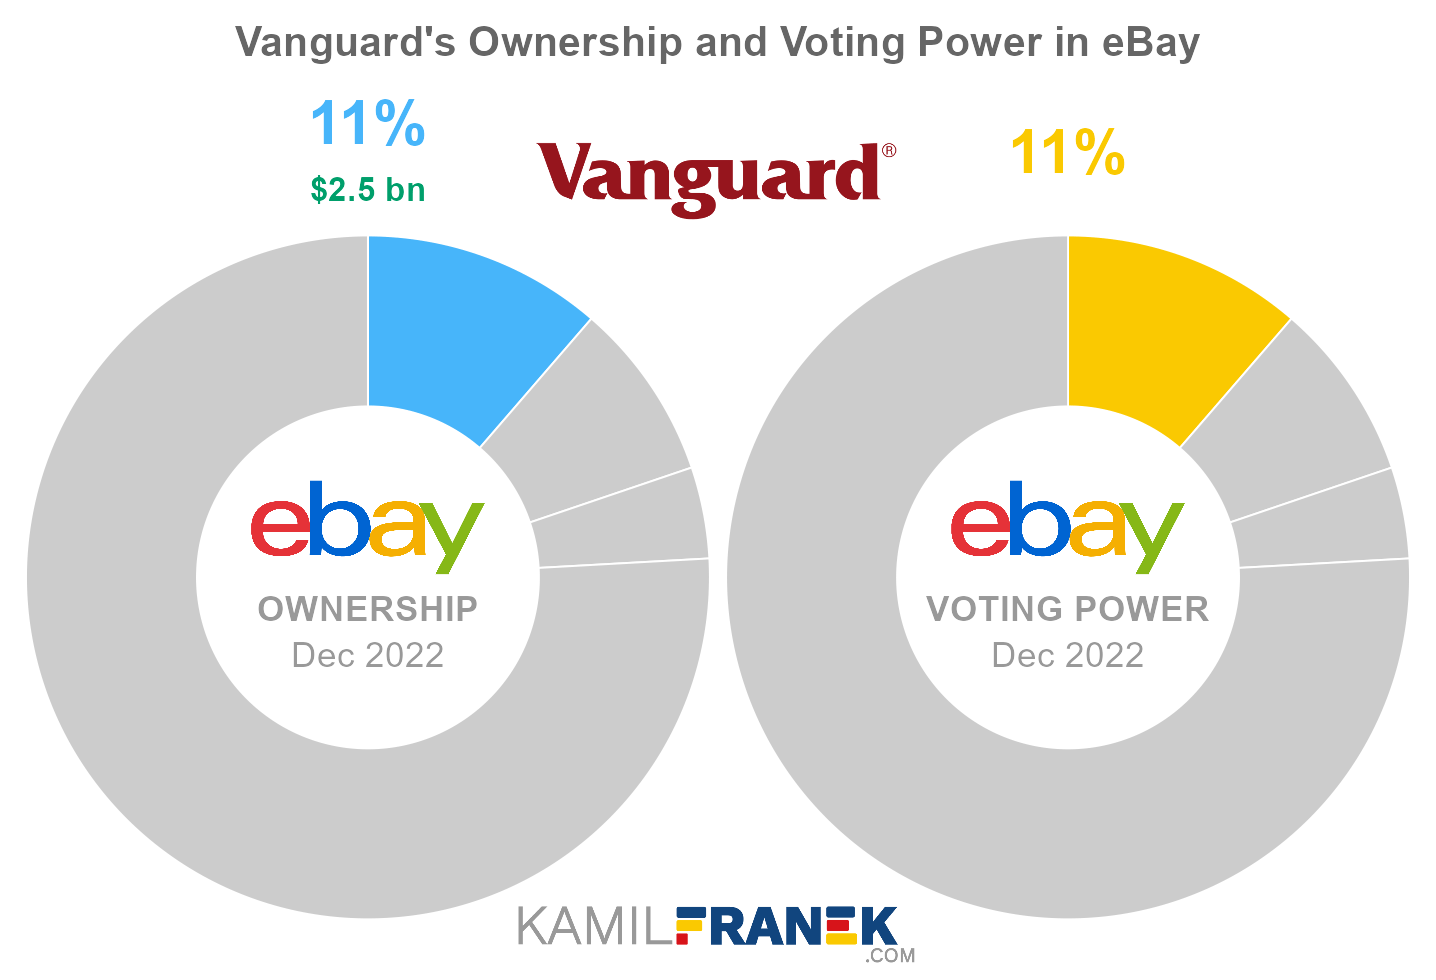 Vanguard's share ownership and voting power in eBay (chart)